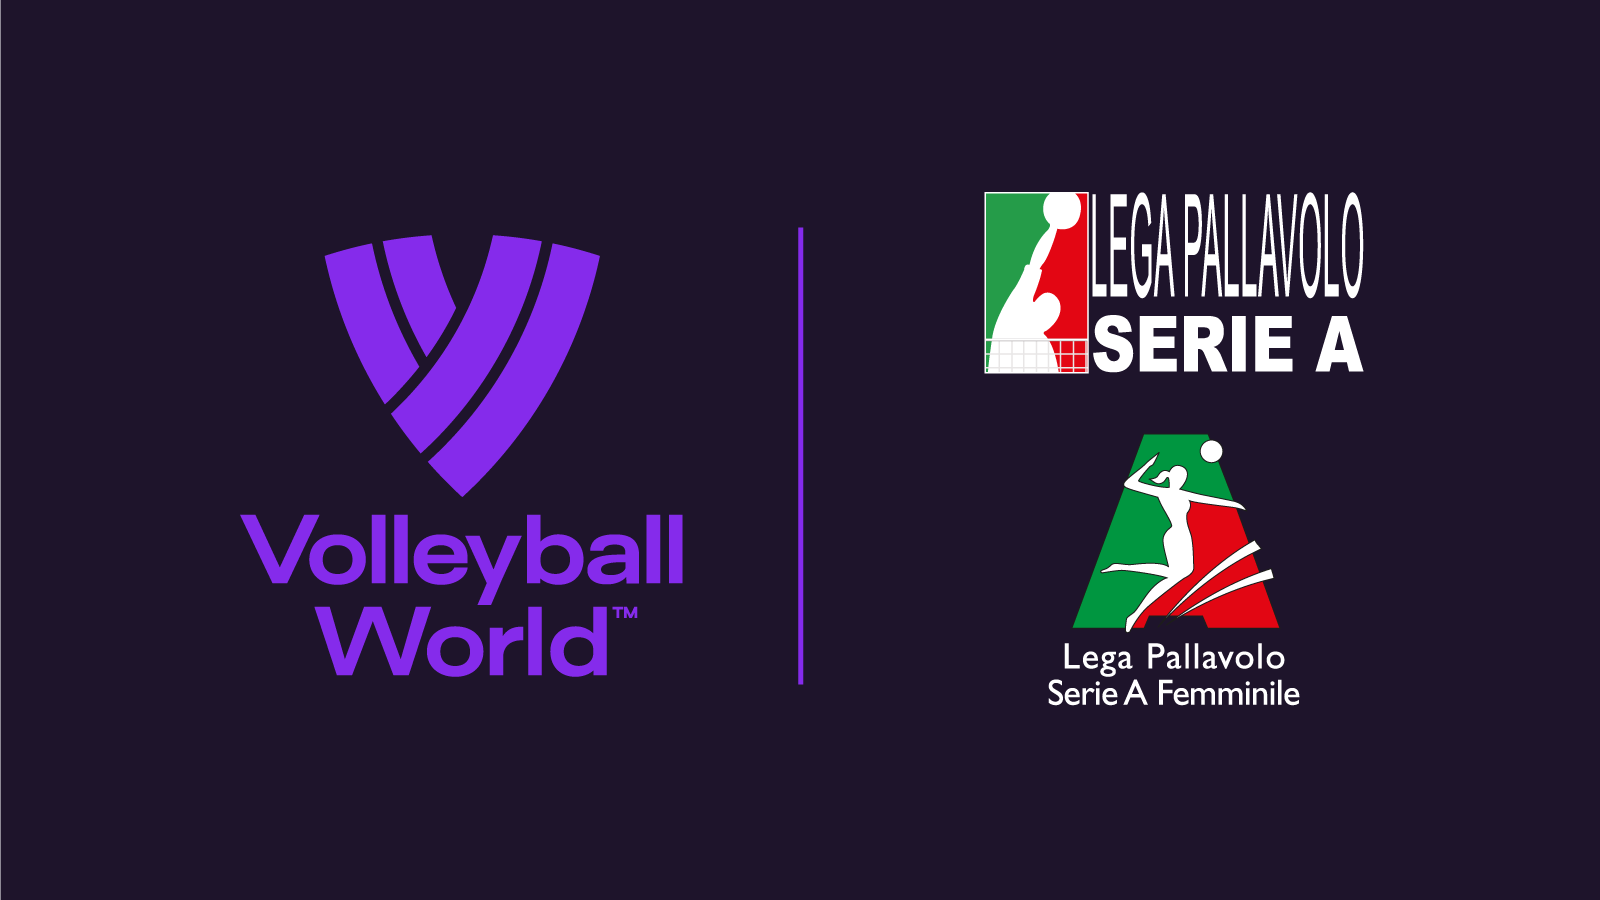 Volleyball World launches partnership with mens and womens Italian Professional Volleyball Leagues volleyballworld